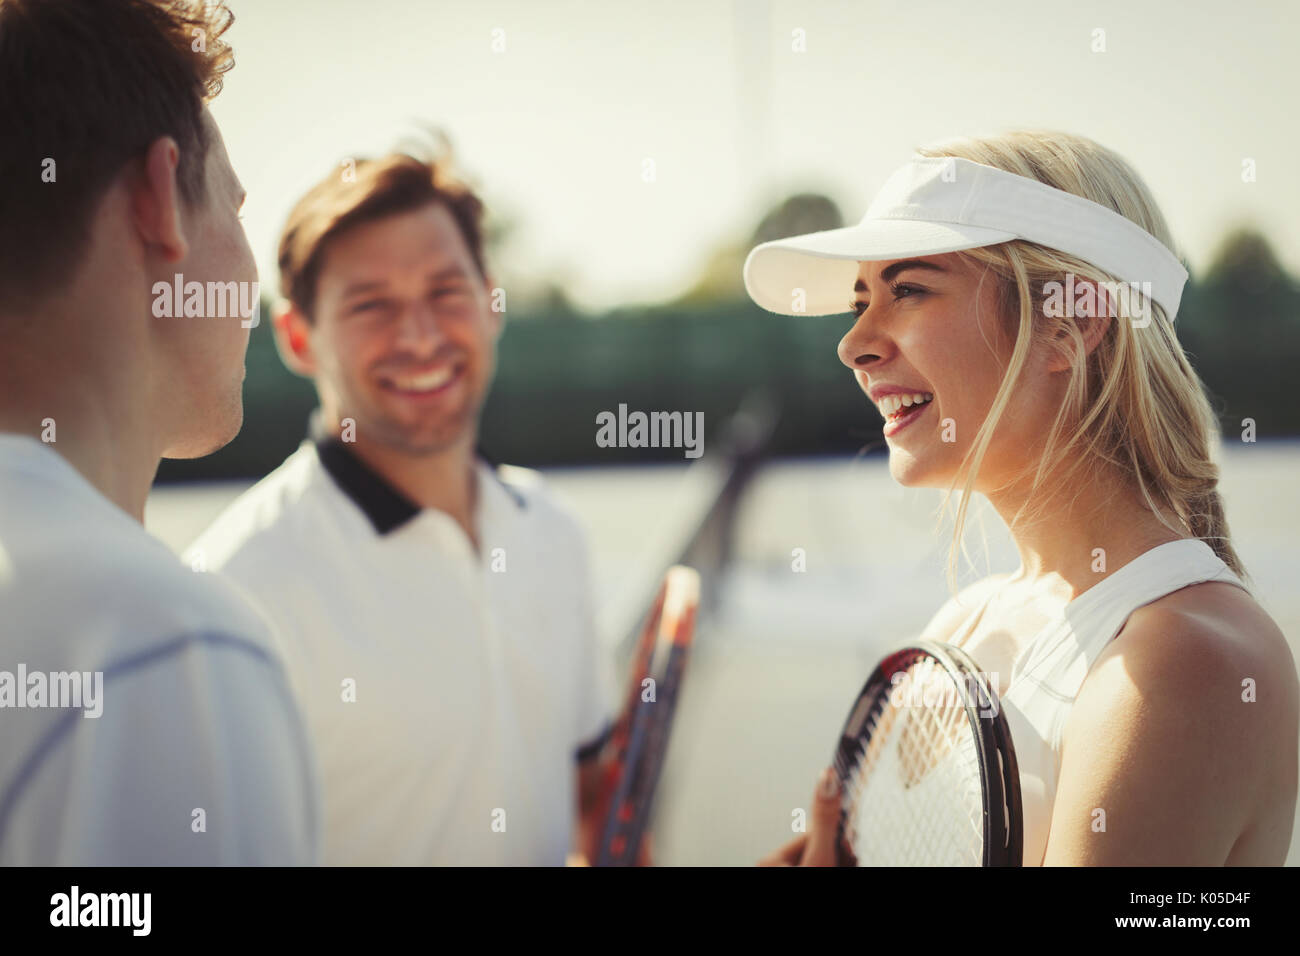 Male and female tennis players talking on tennis court Stock Photo